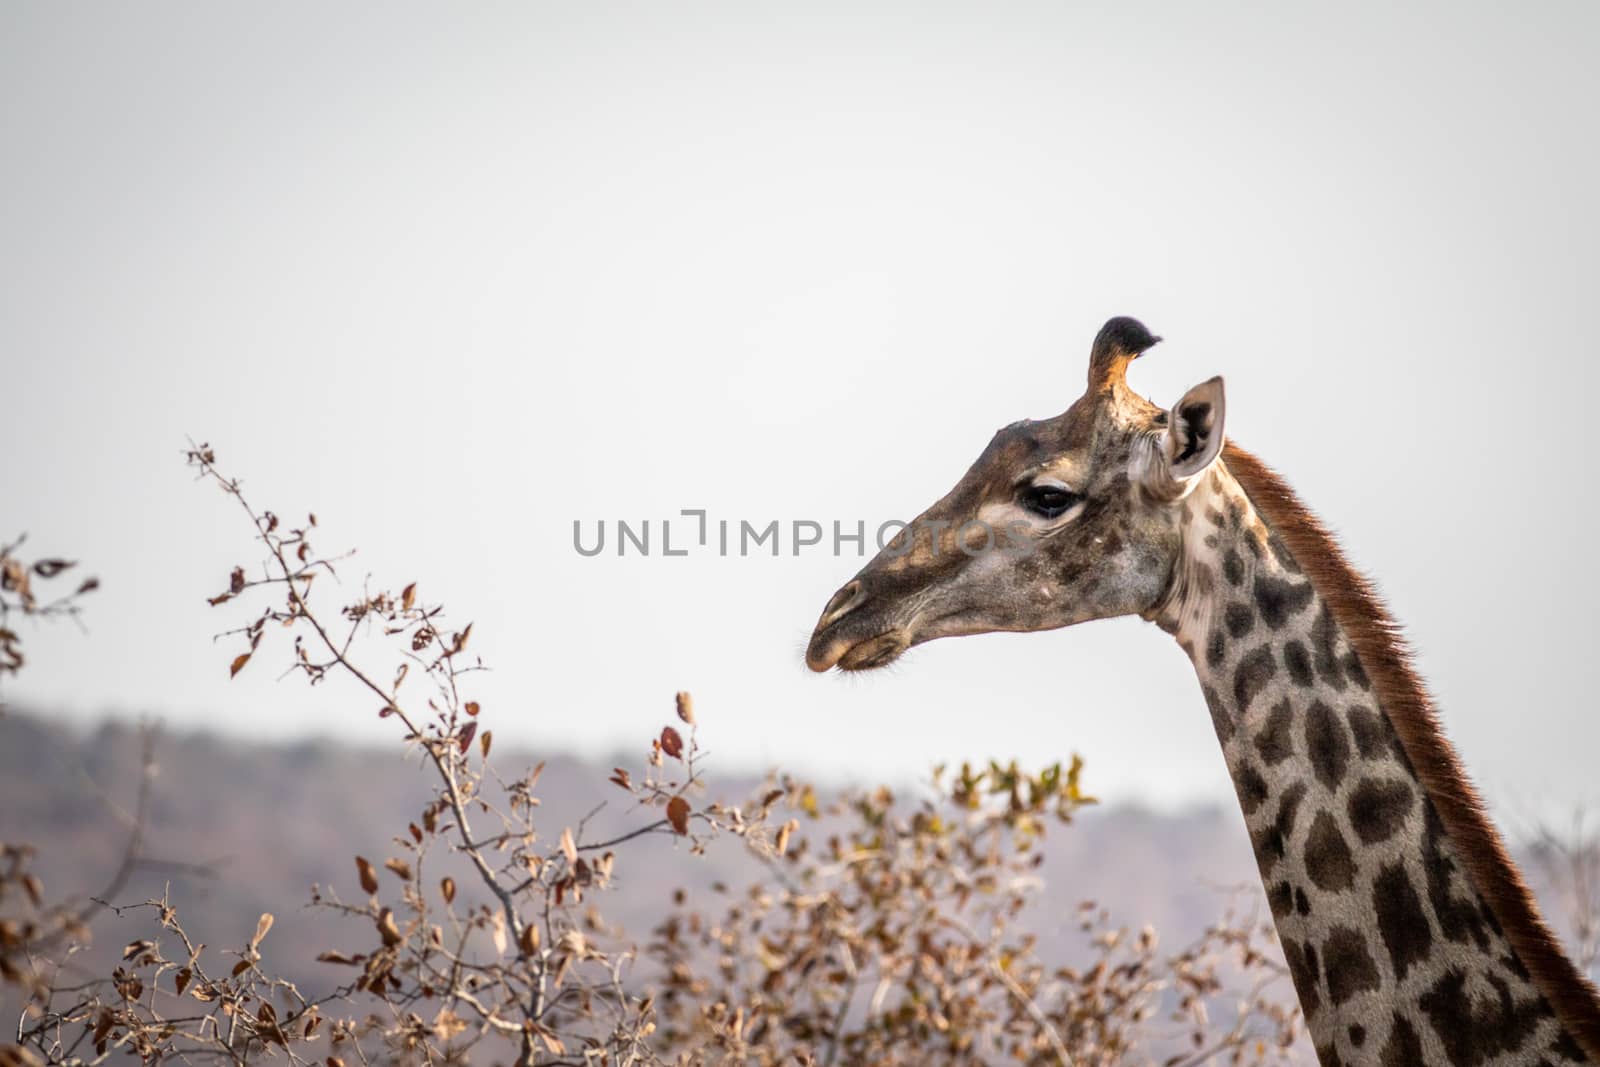 Side profile of a Giraffe in Africa. by Simoneemanphotography